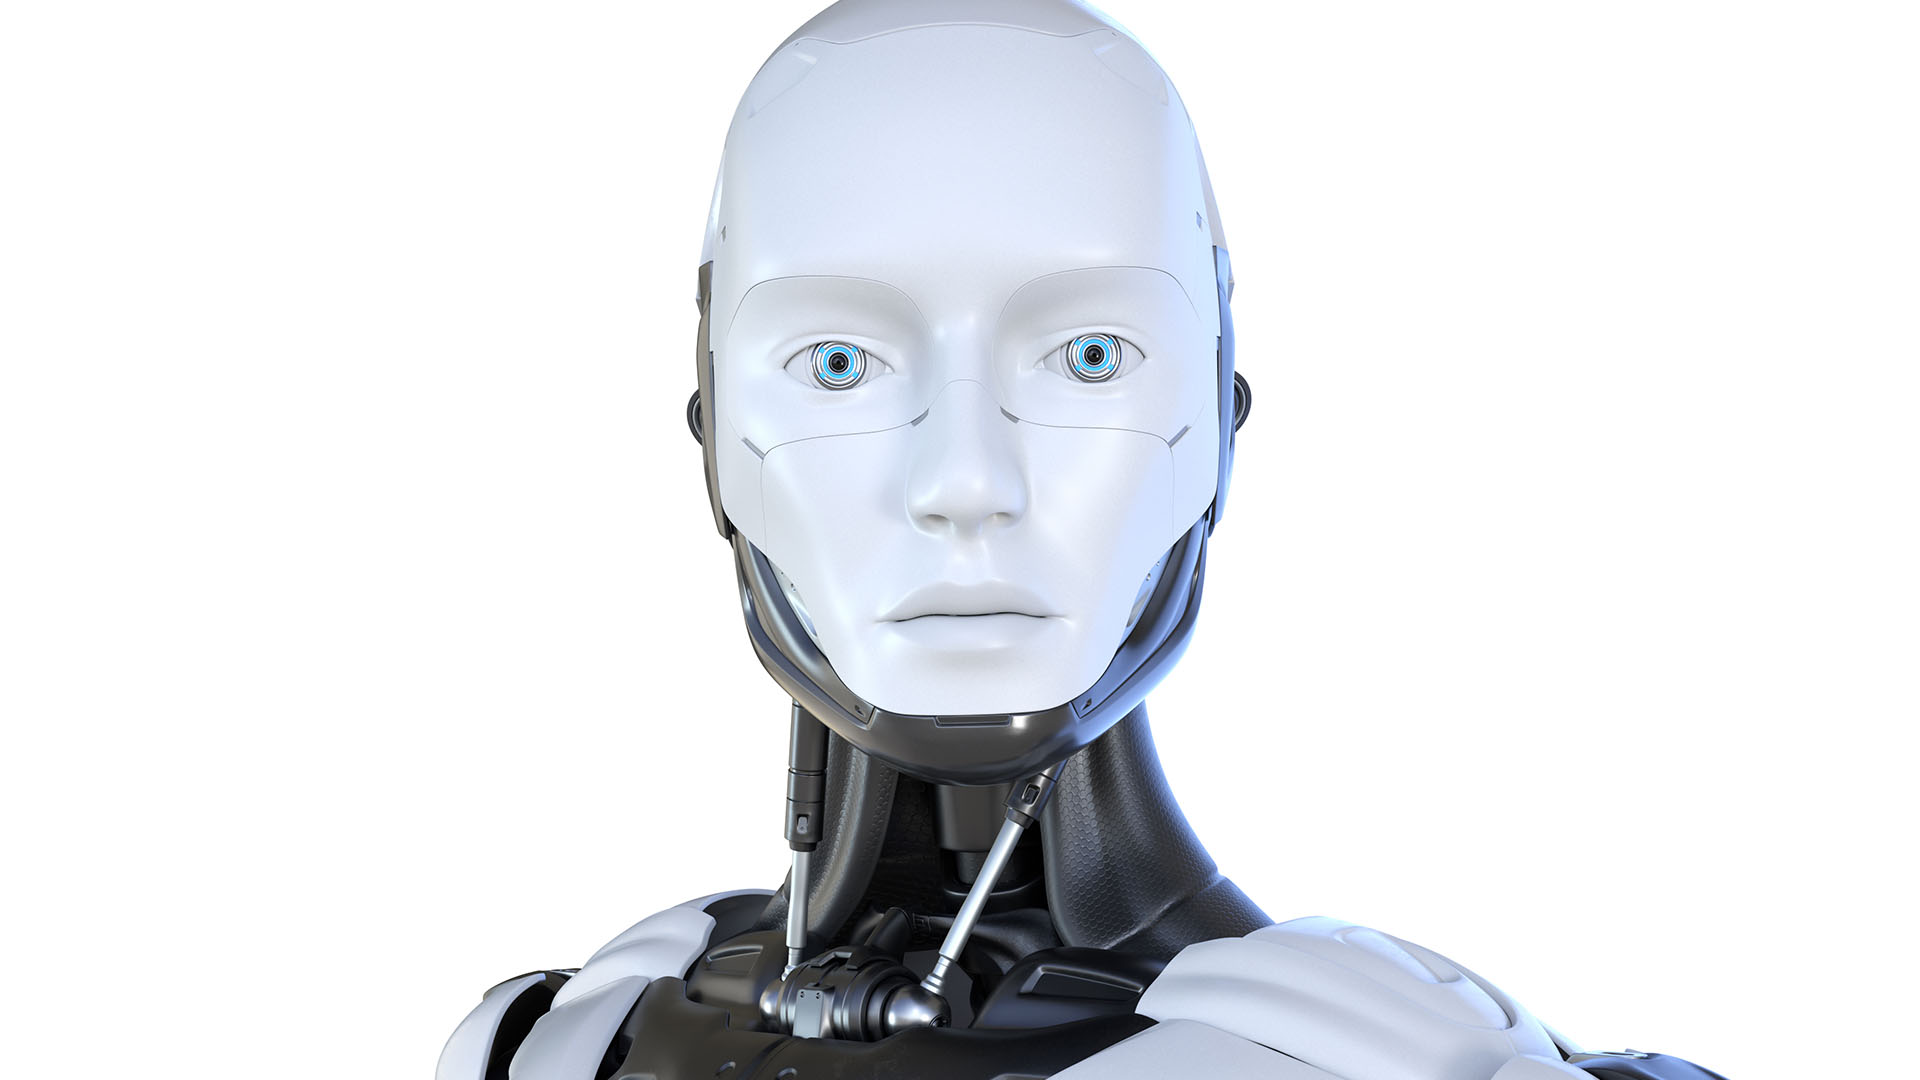 A close-up of a humanoid robot with a white face and blue eyes, featuring visible mechanical components around the neck and shoulders, captures the essence of the Human vs. Machine clash.